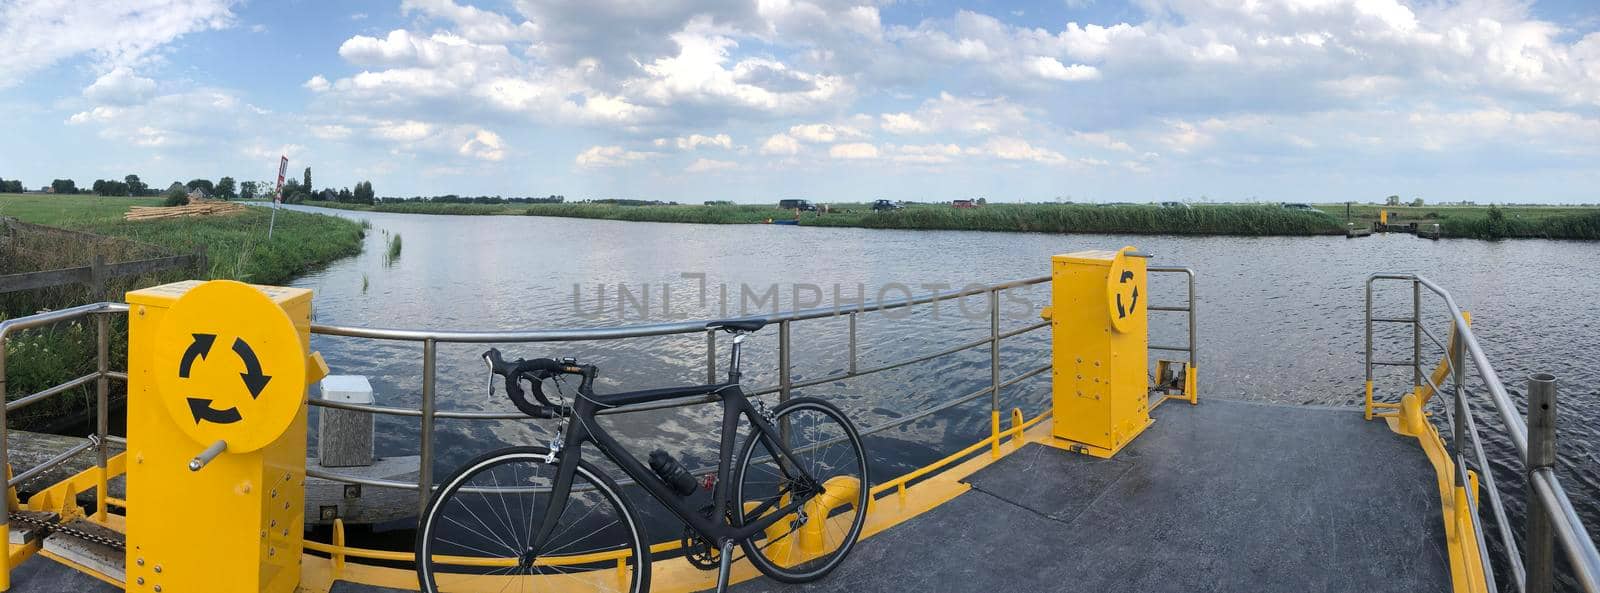 Self-service ferry around Rotstergaast in Friesland, The Netherlands